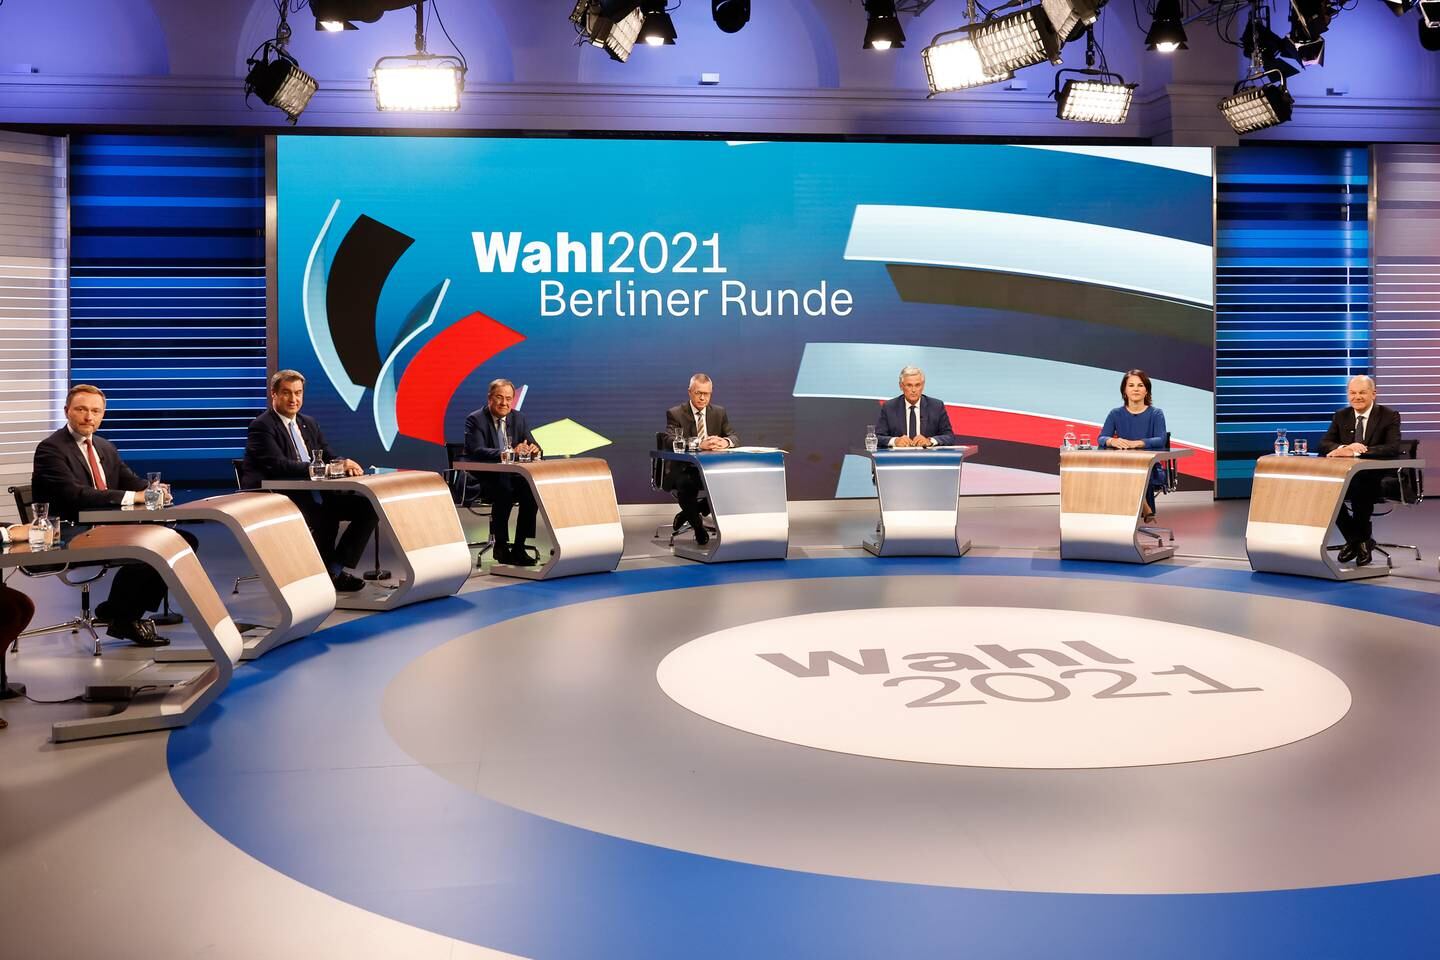 The party leaders discussed the fallout from the election in a televised debate in Berlin on Sunday. Getty